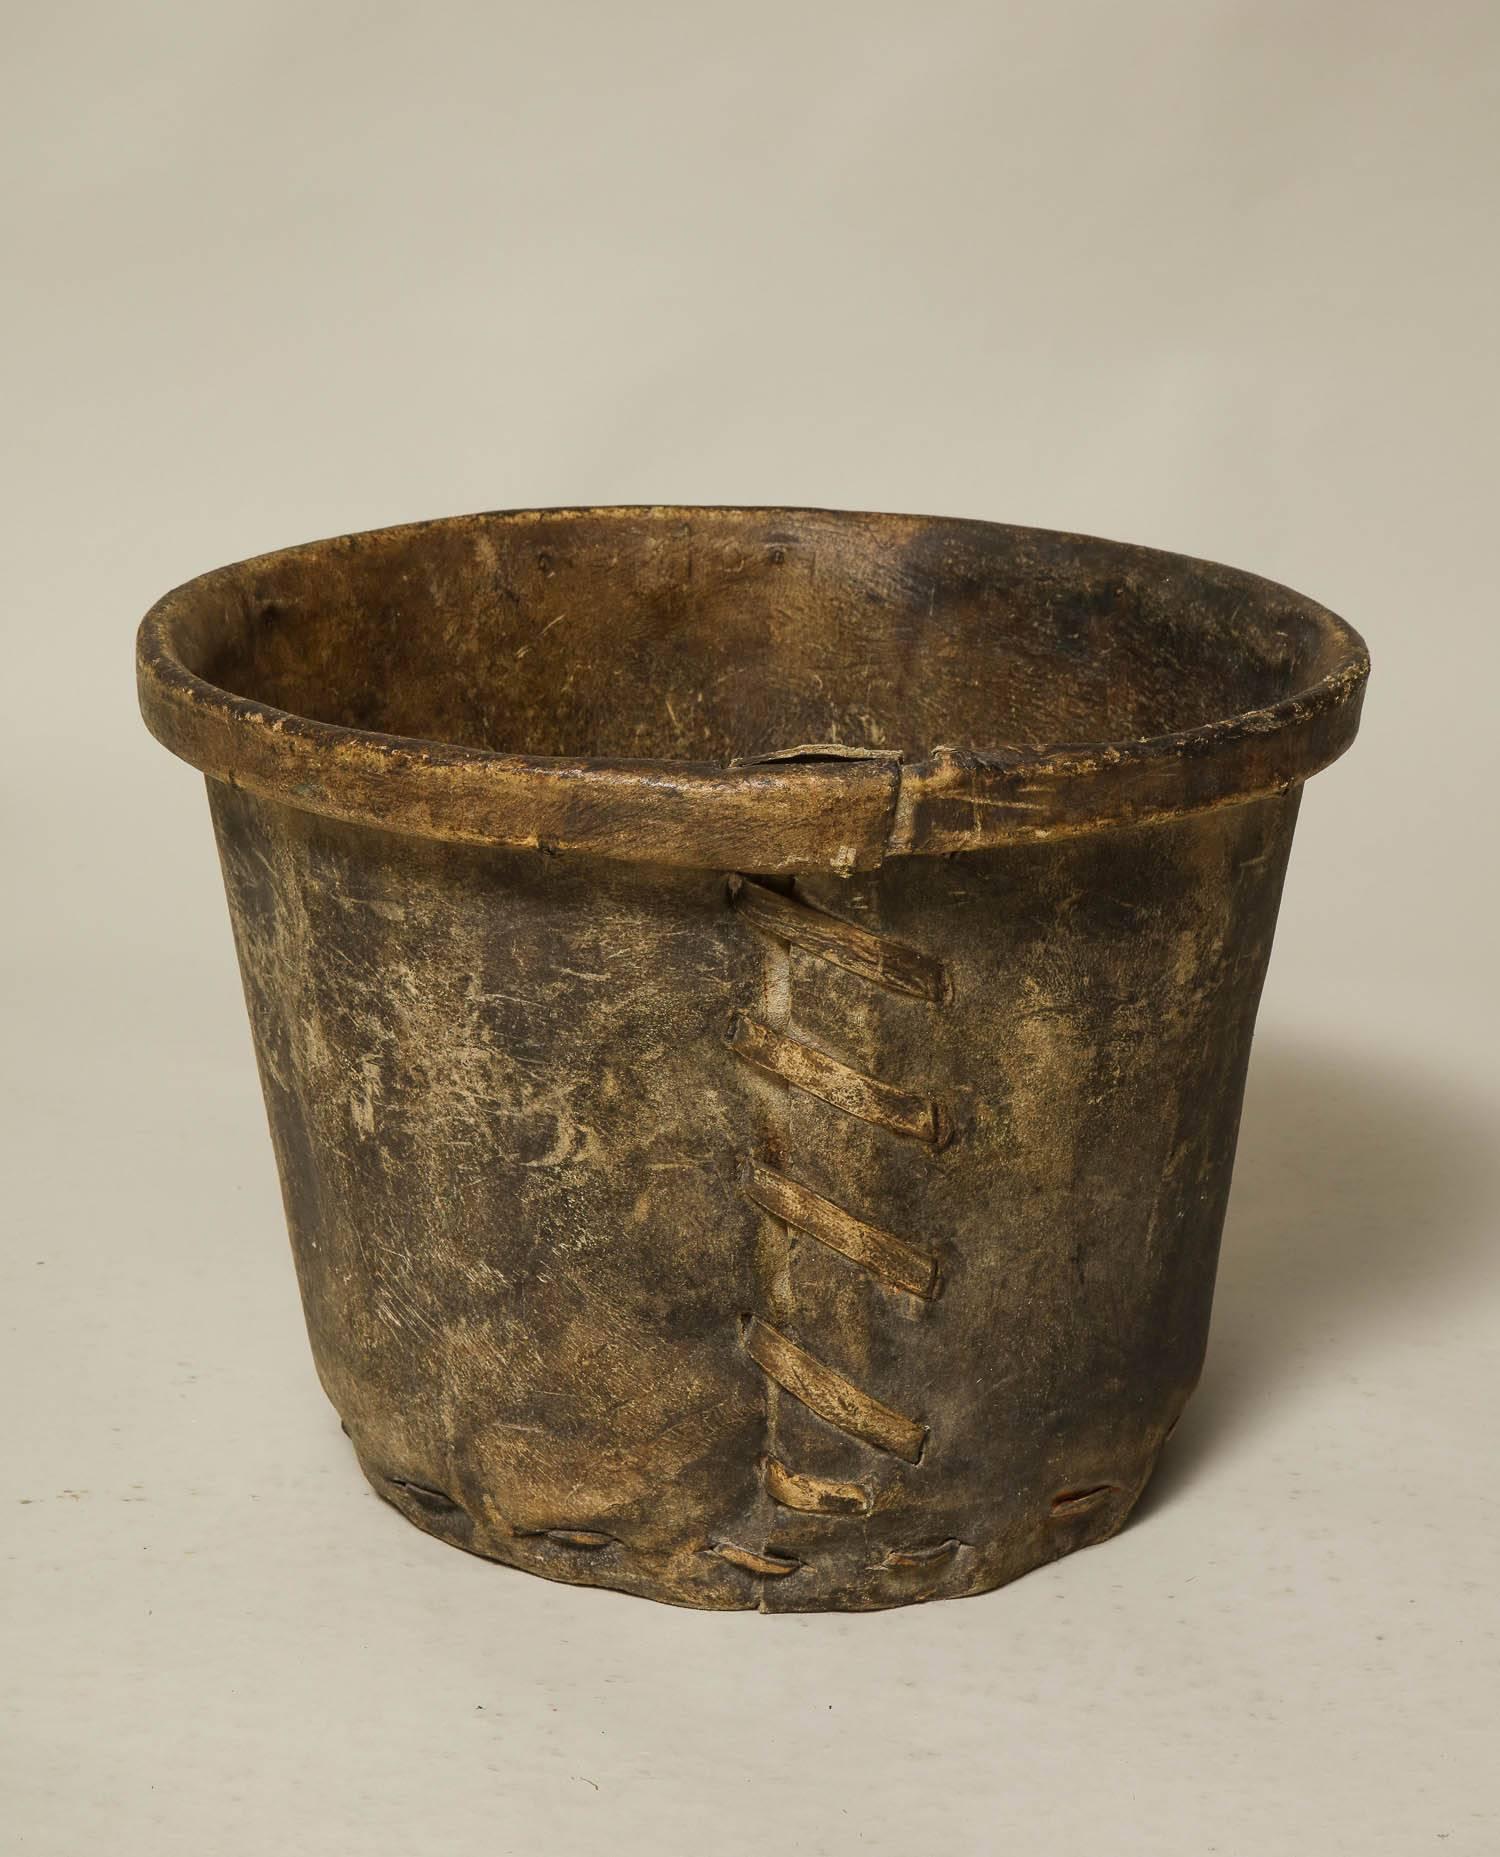 A sturdy and rustic bucket made of rawhide, with rolled rim and stitched seams. Now useful next to a fireplace for logs or as waste paper basket, English, 19th century.